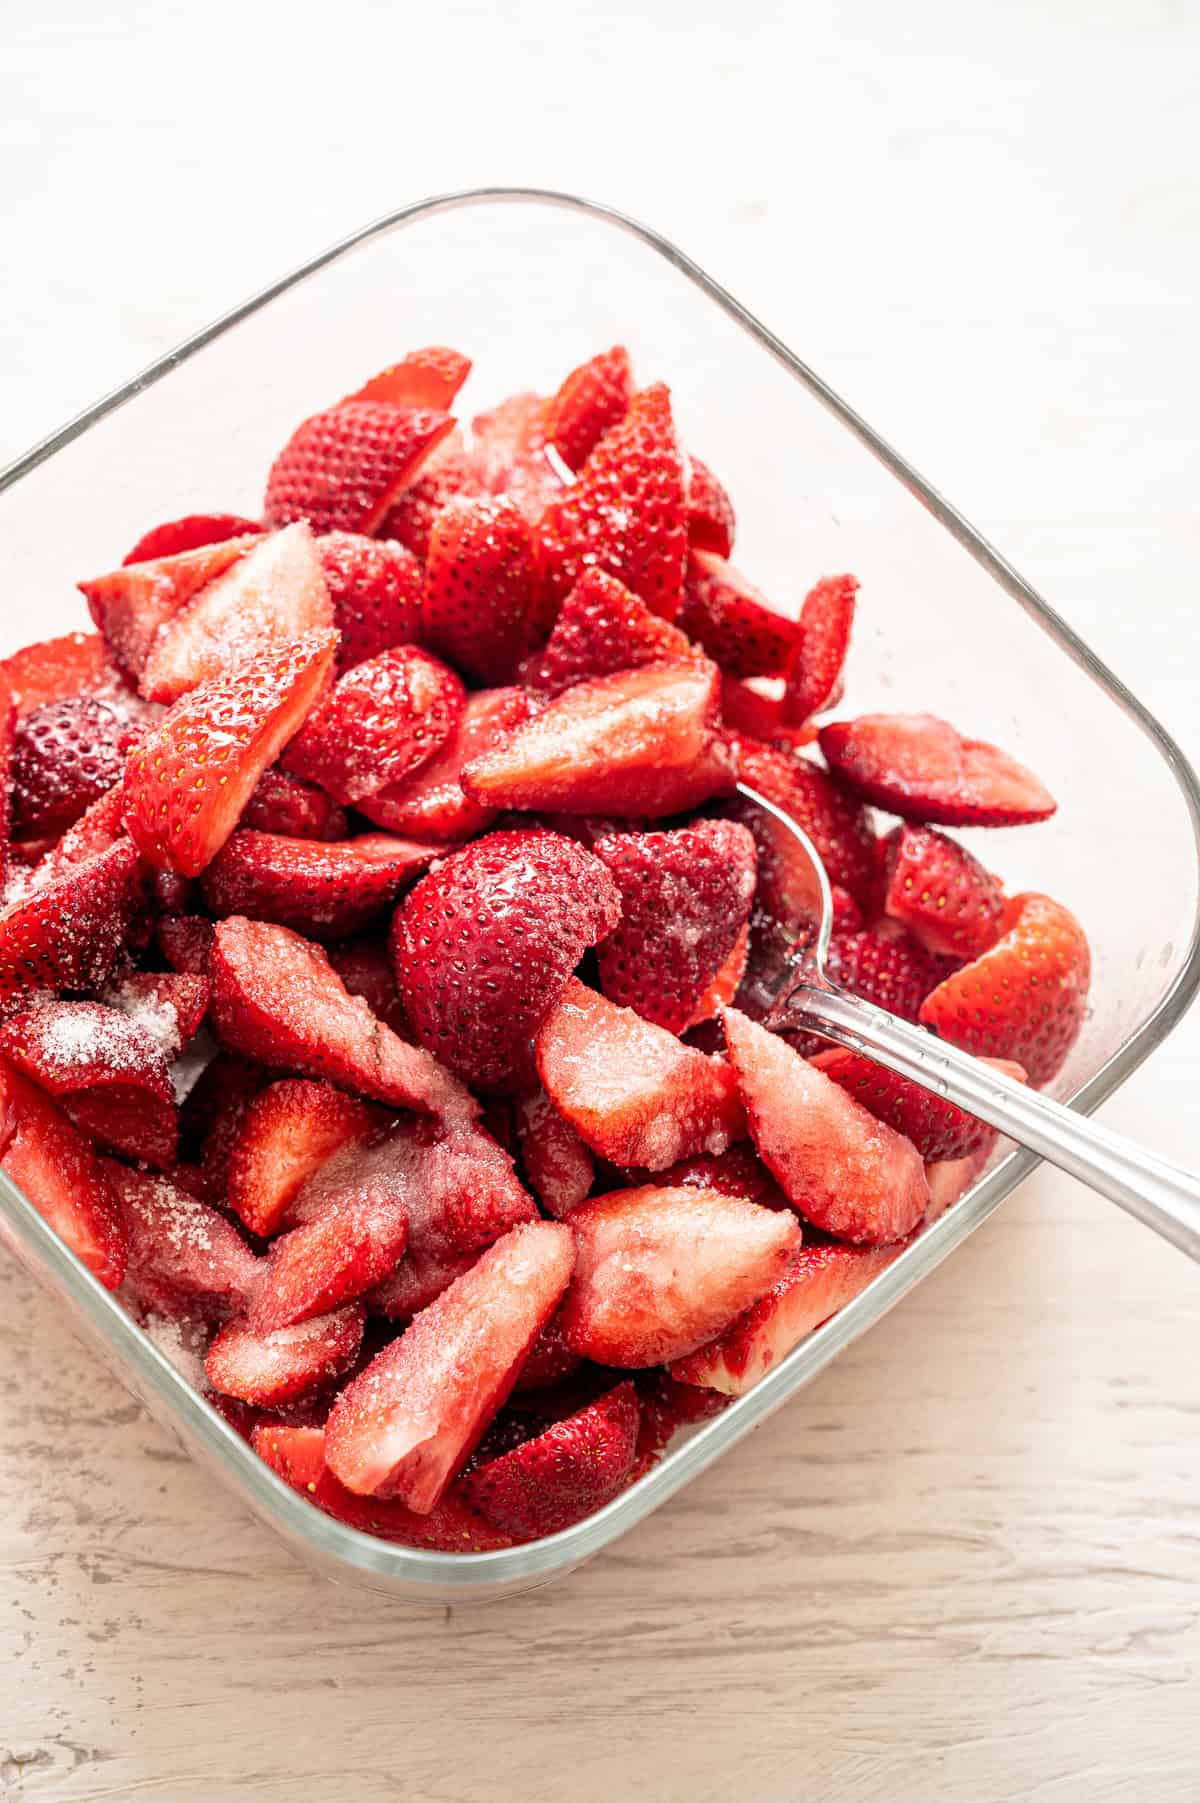 Sliced strawberries in a glass baking dish being tossed with sugar.